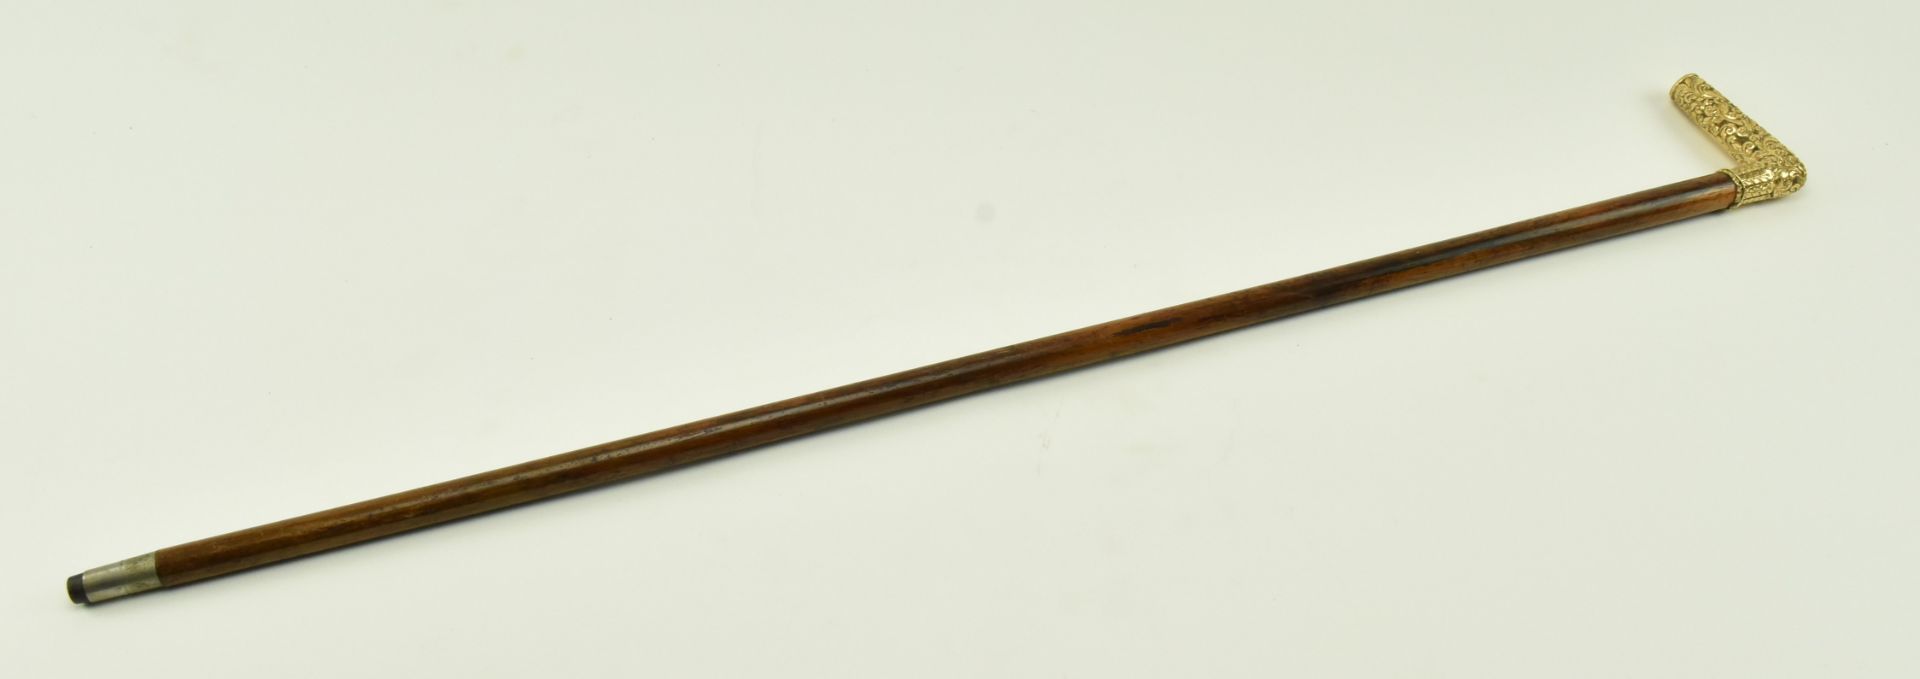 19TH CENTURY GOLD PLATED HANDLE OAK WALKING STICK - Image 5 of 5